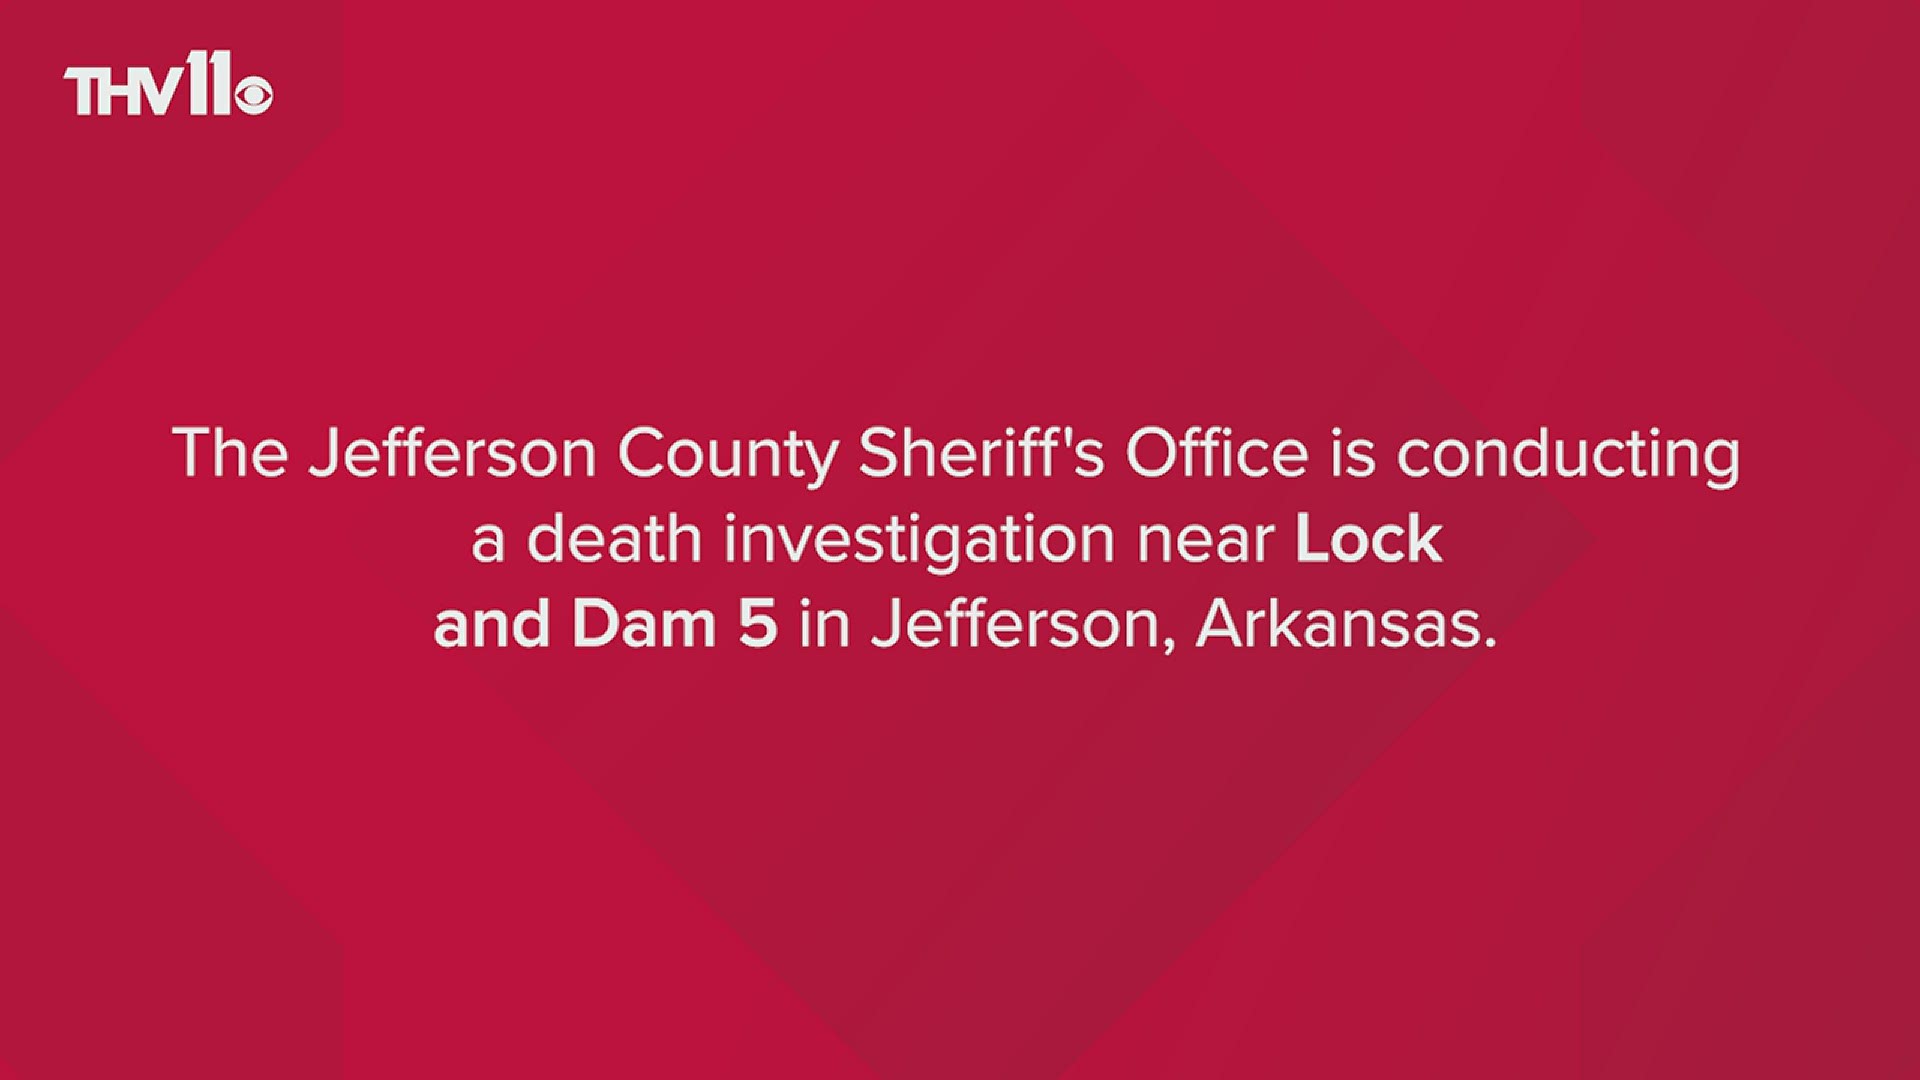 Sheriff's deputies are conducting a death investigation near Lock and Dam 5 in Jefferson, Arkansas.